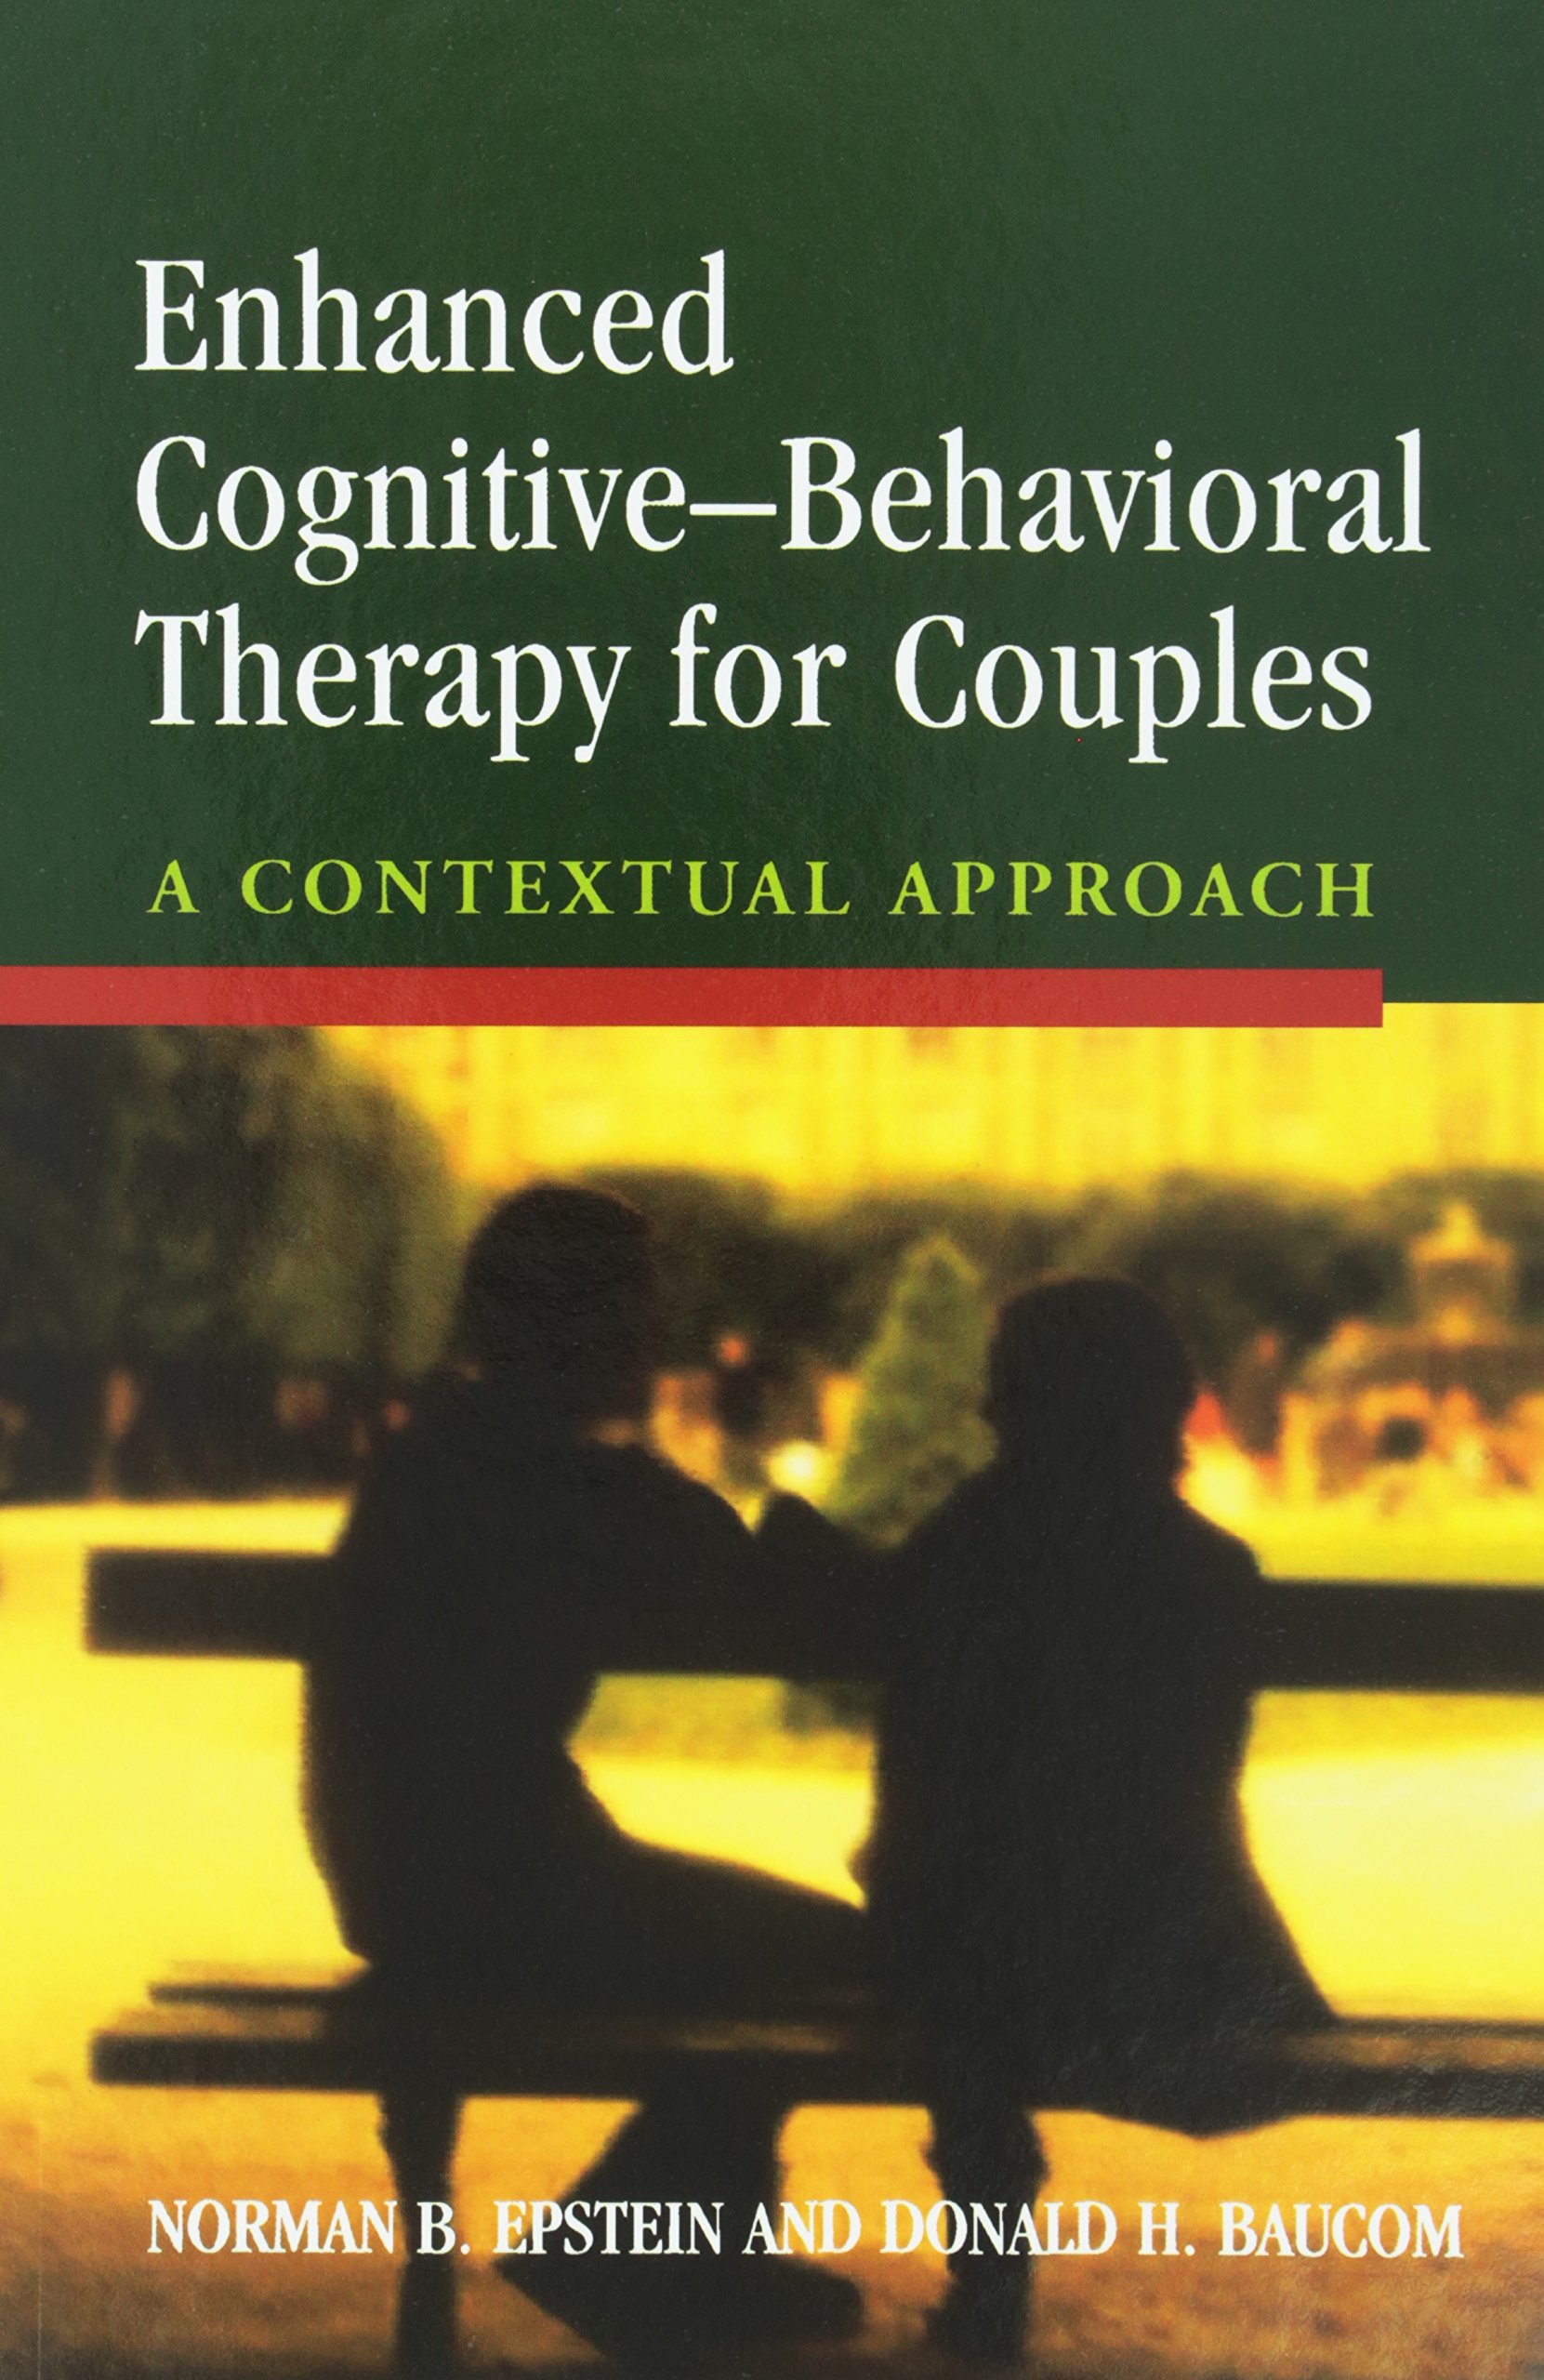 Enhanced Cognitive-Behavioral Therapy for Couples: A Contextual Approach